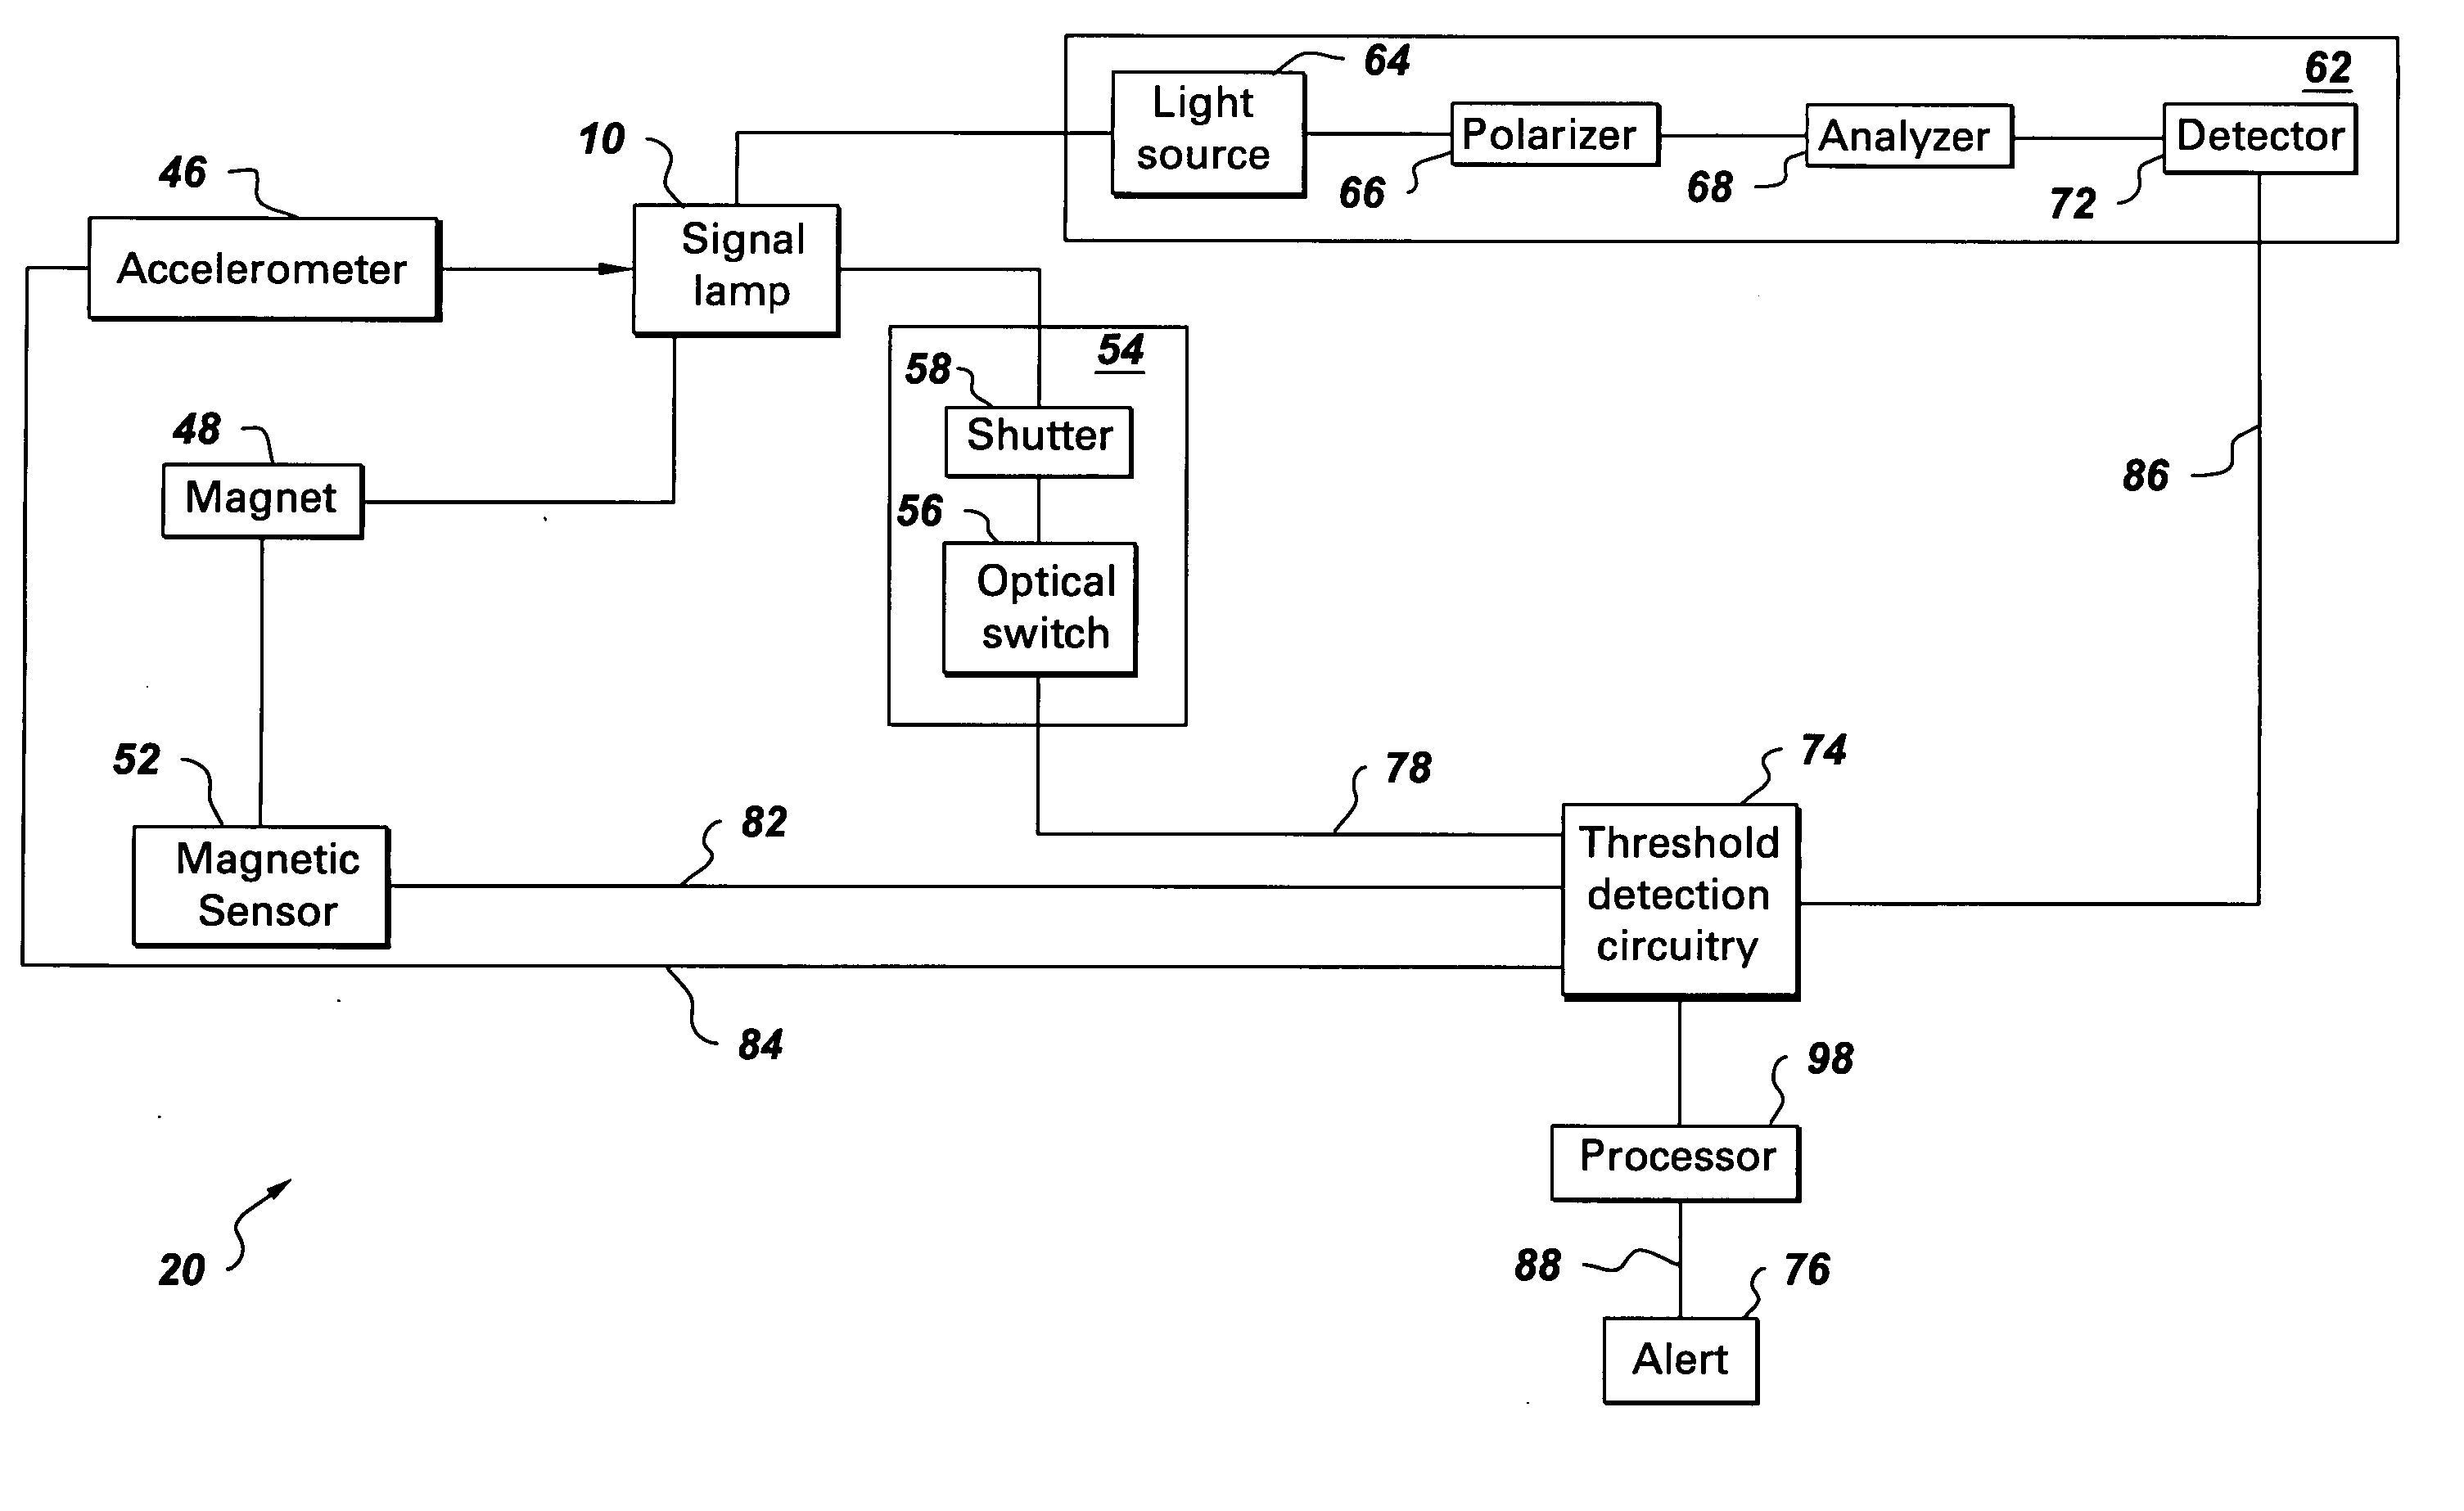 System and method for monitoring alignment of a signal lamp